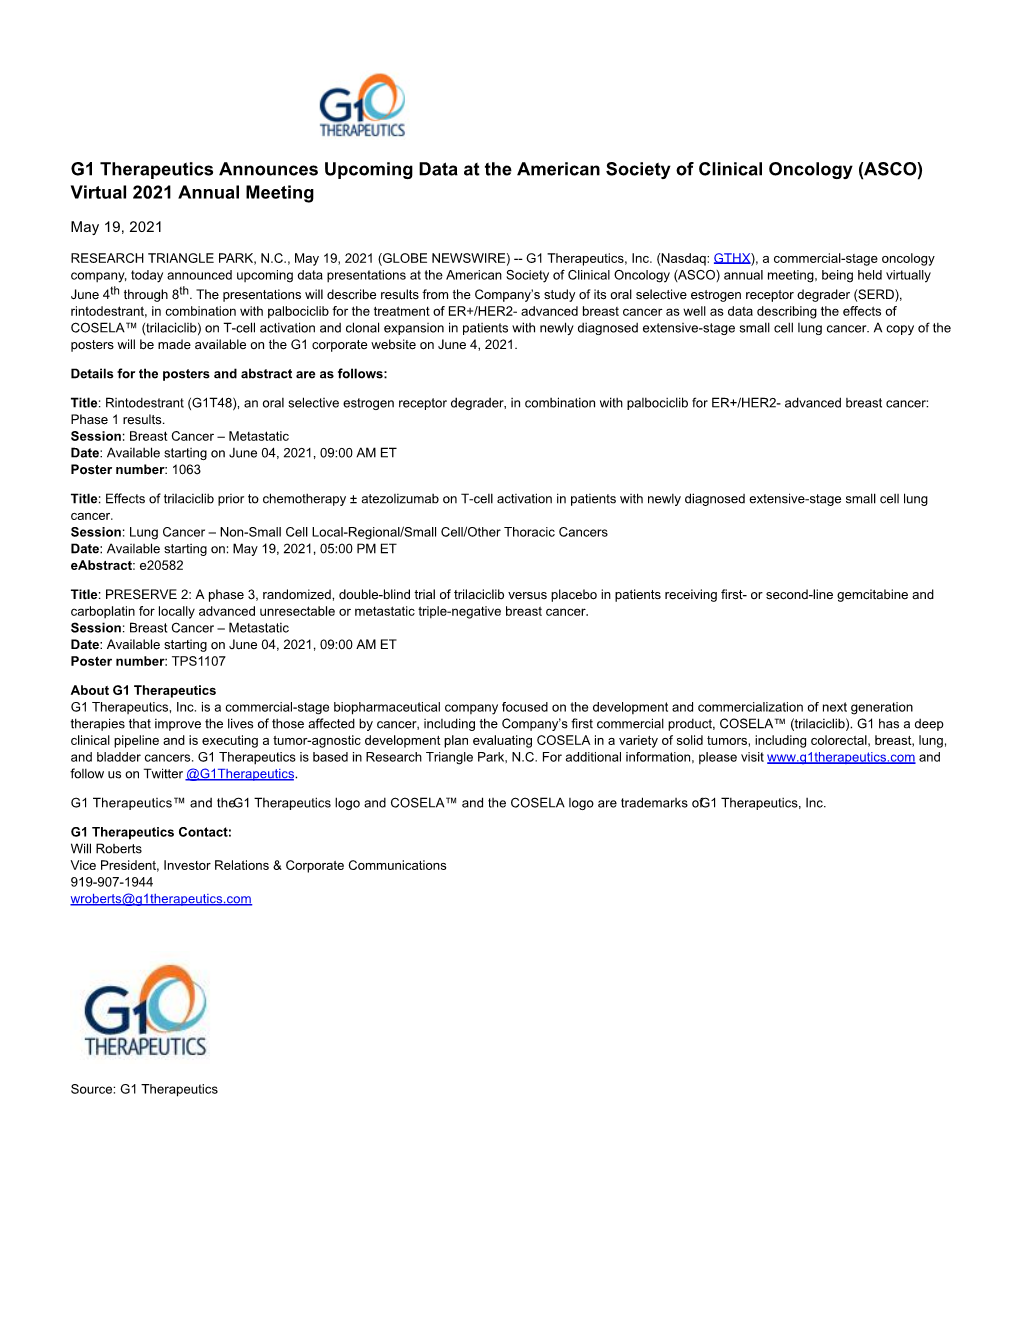 G1 Therapeutics Announces Upcoming Data at the American Society of Clinical Oncology (ASCO) Virtual 2021 Annual Meeting